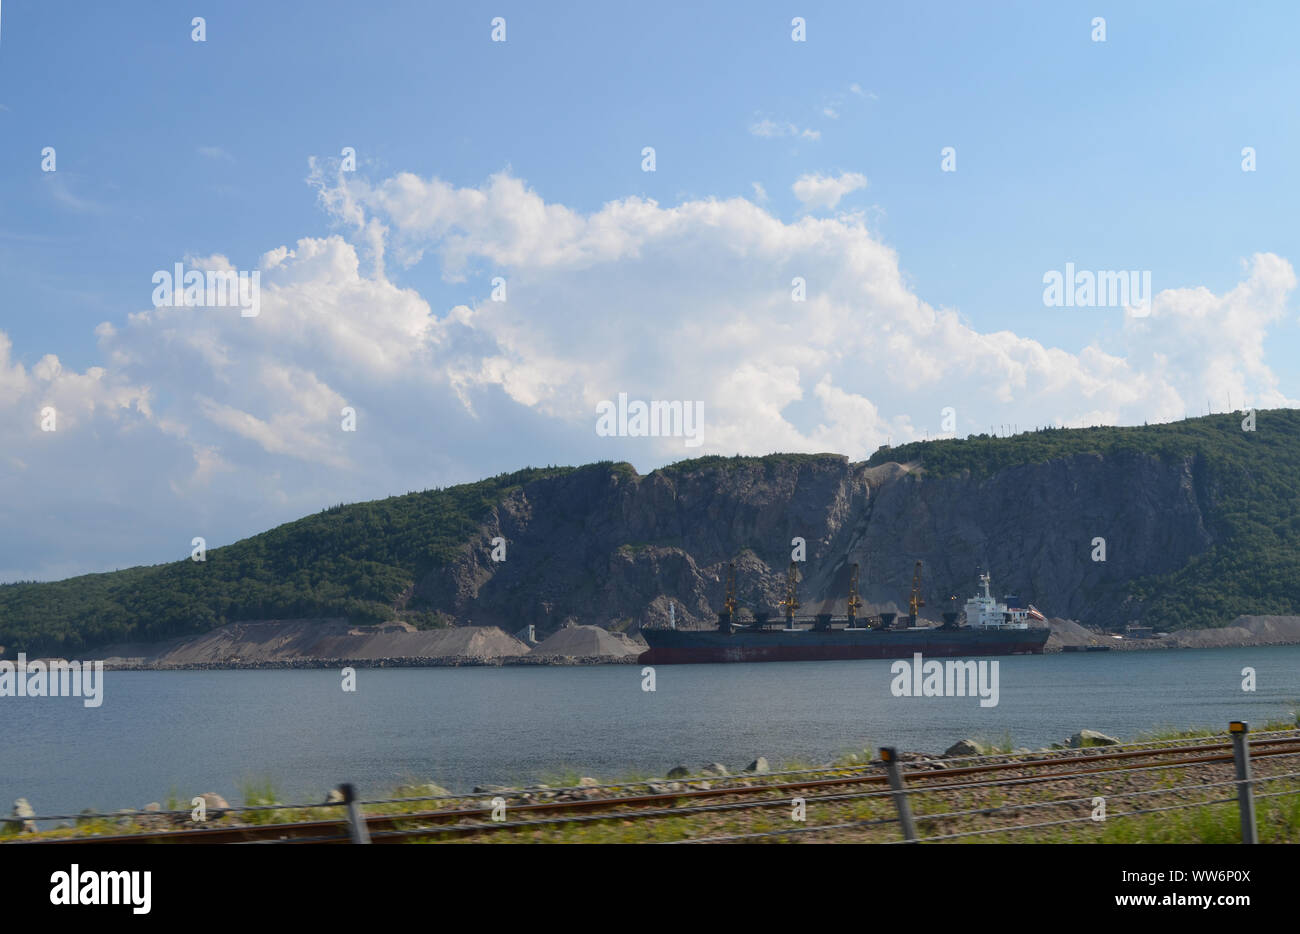 Summer in Nova Scotia: Porcupine Mountain Quarry in Aulds Cove on the Shore of Strait of Canso as seen from Canso Causeway Stock Photo